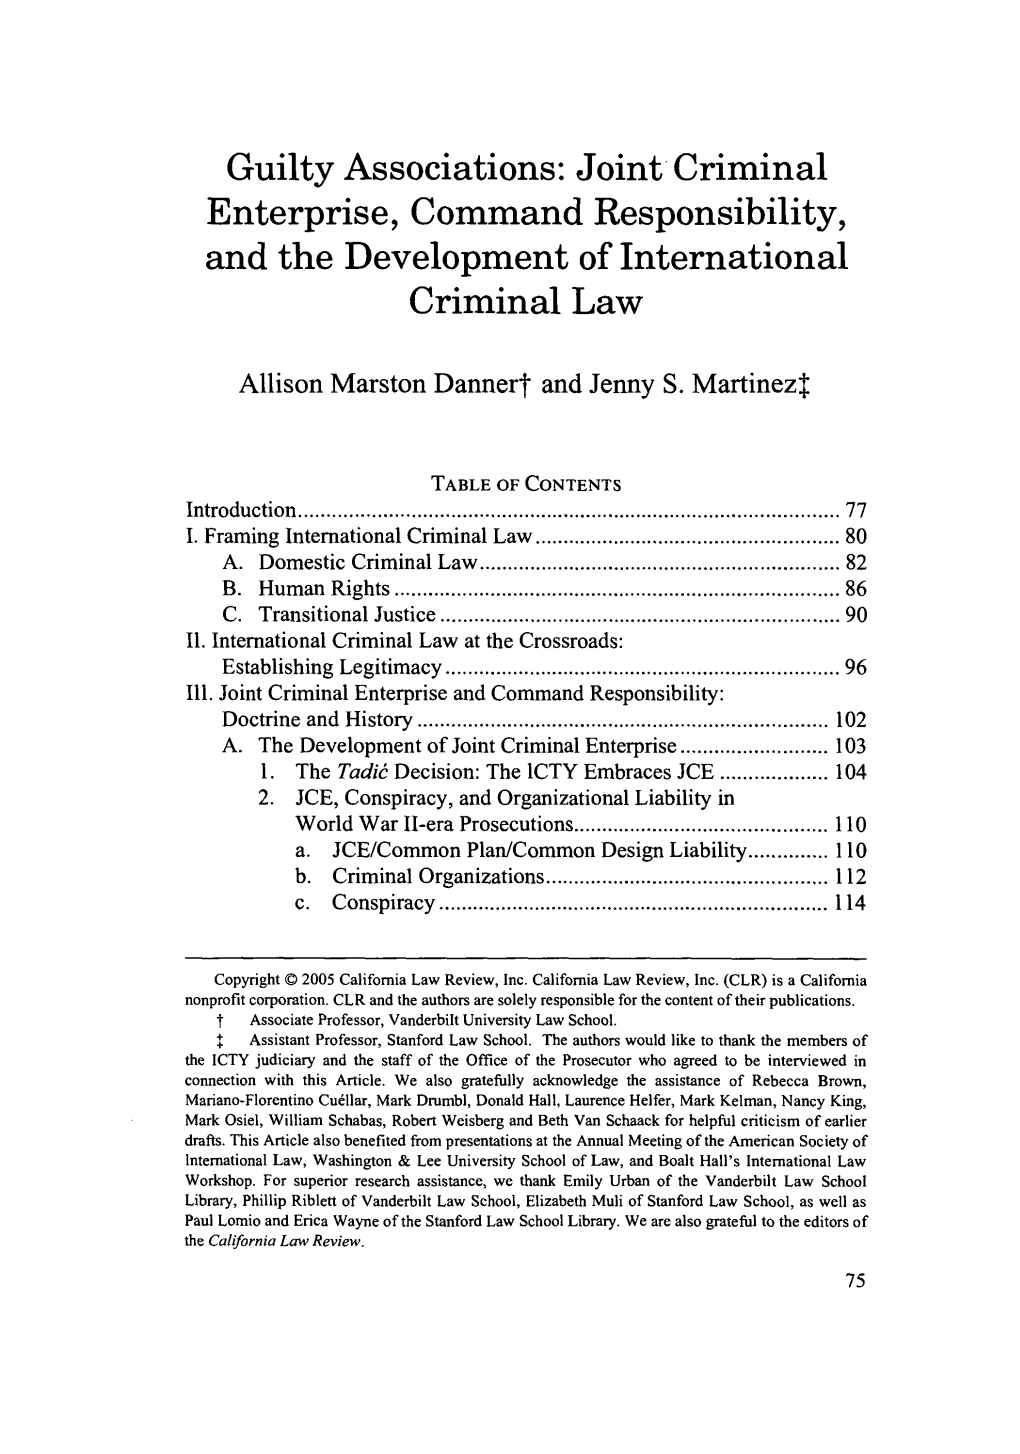 Guilty Associations: Joint Criminal Enterprise, Command Responsibility, and the Development of International Criminal Law